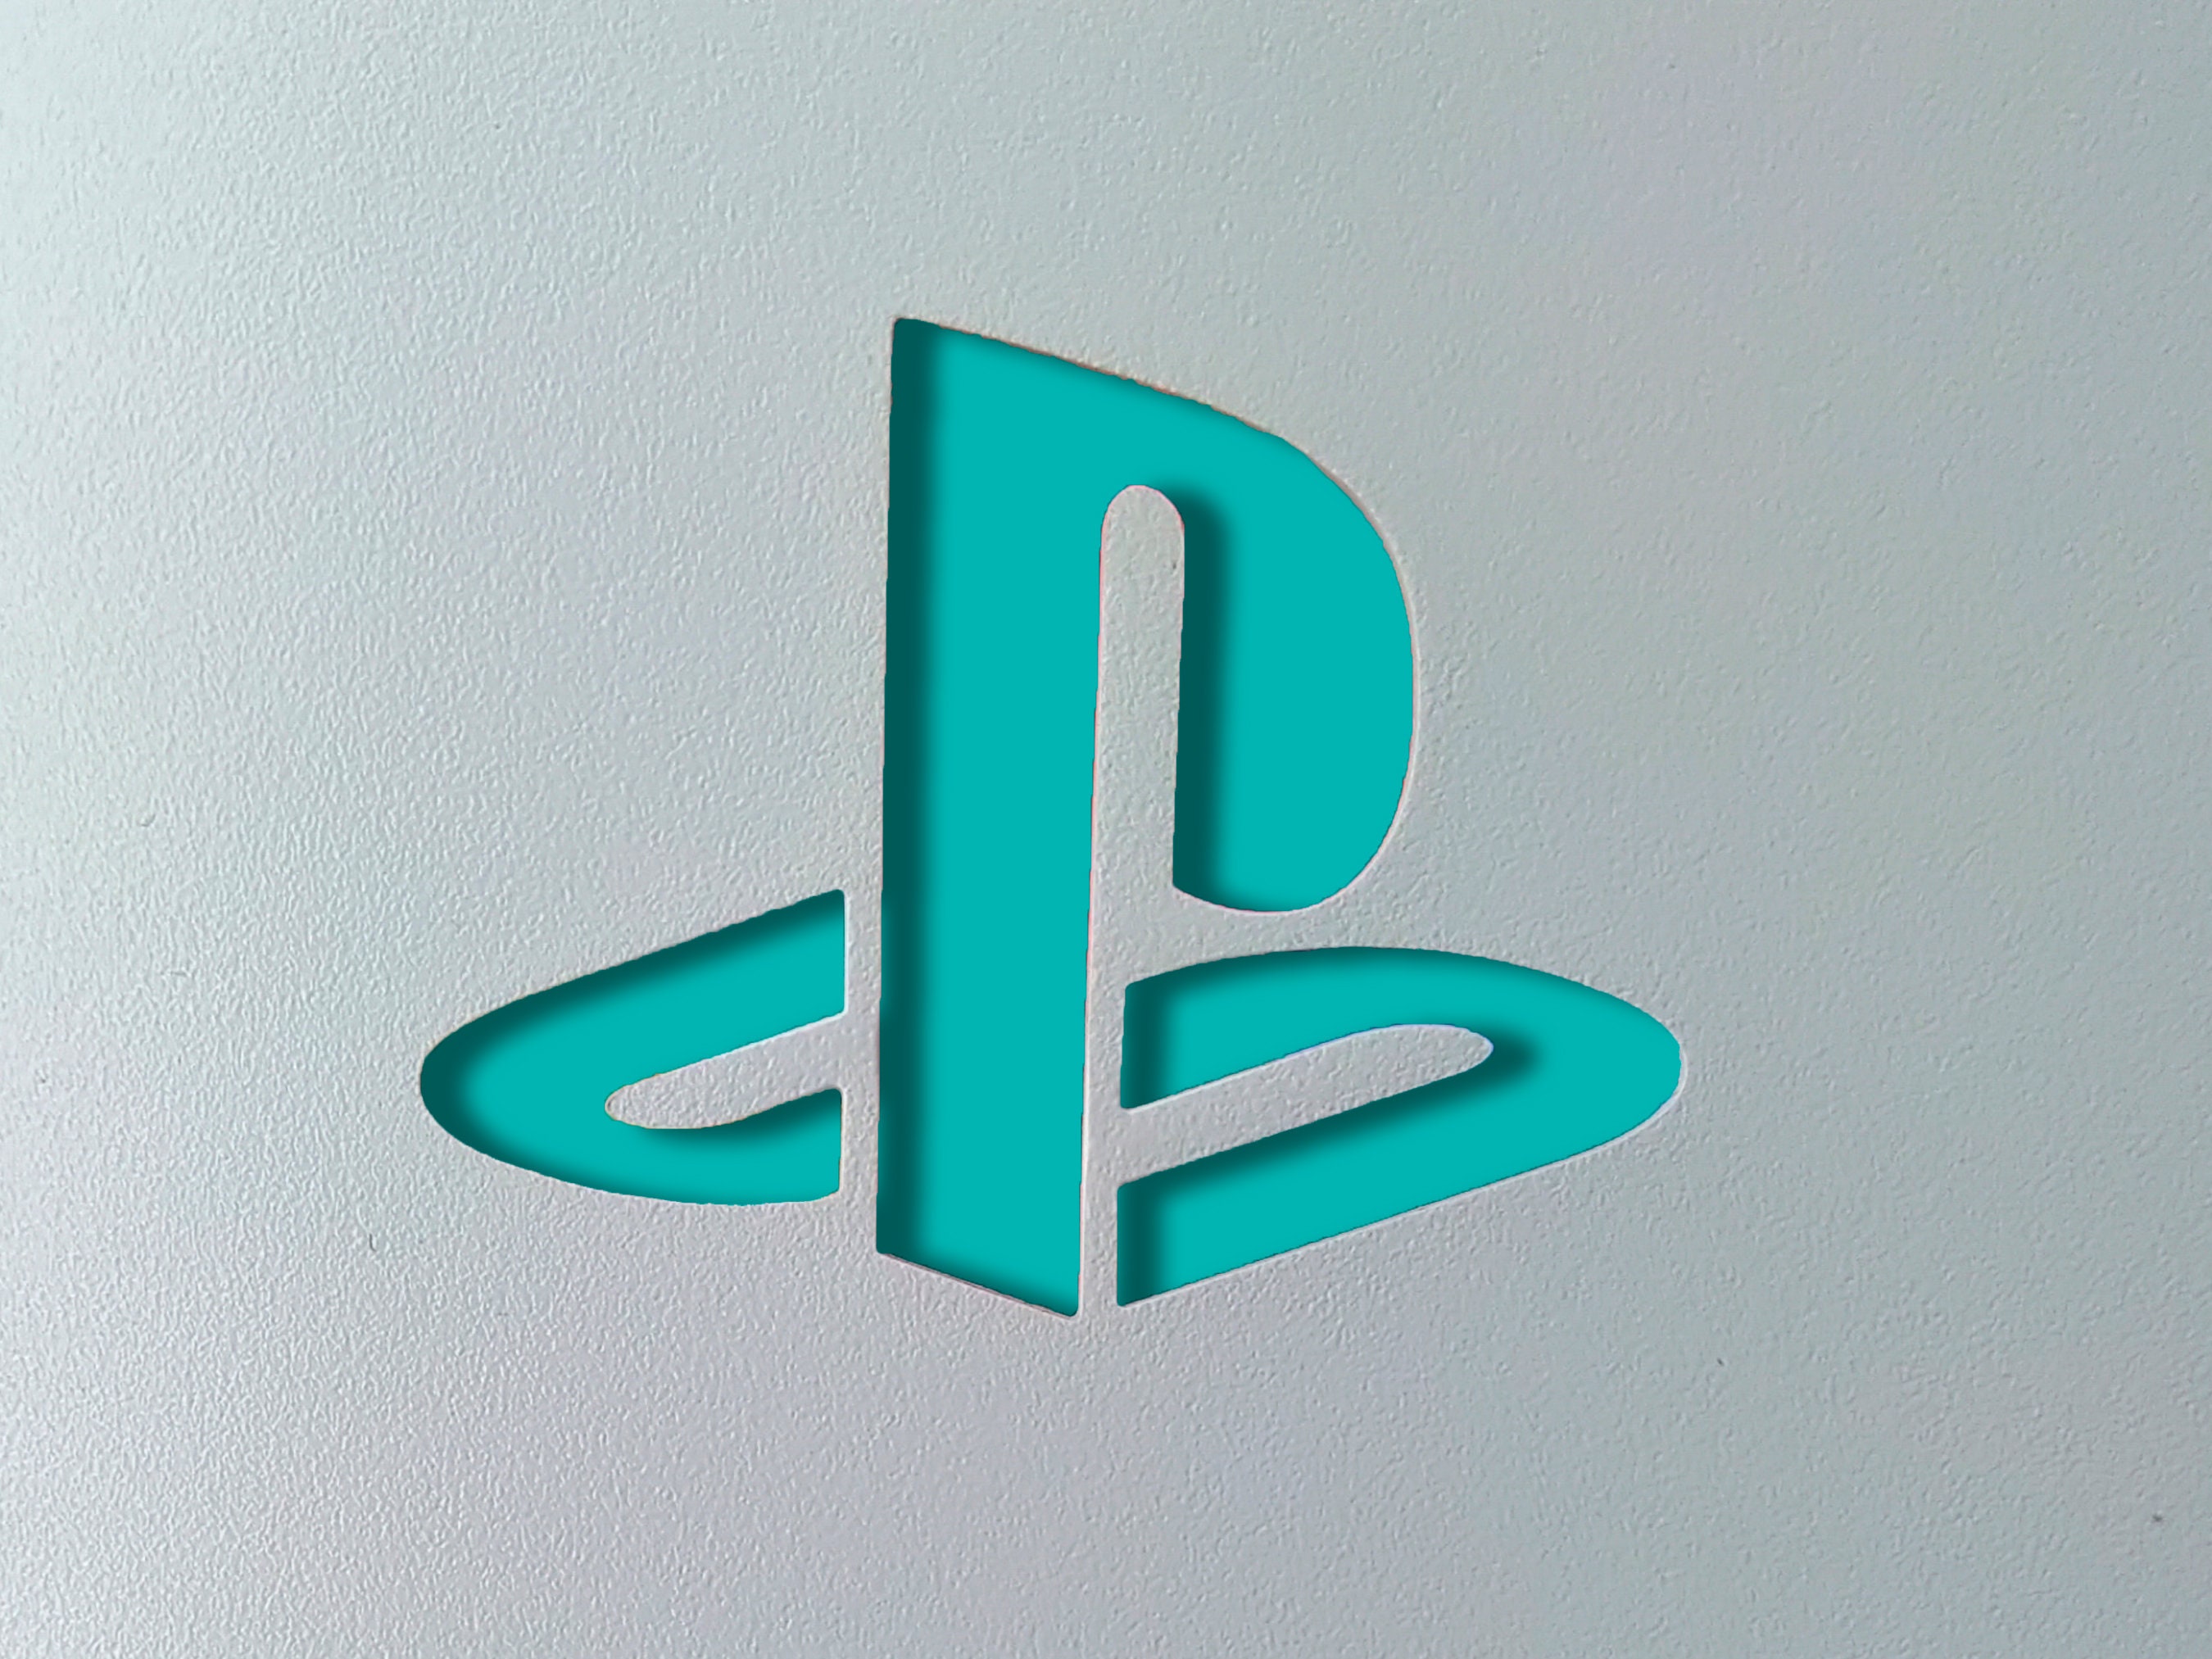  PS5 Logo Underlay Sticker for Playstation 5 Console & PS Logo  Vinyl Decal Sticker for DualSense Controller (Classic Retro-Look Color) - 2  Packs : Electronics